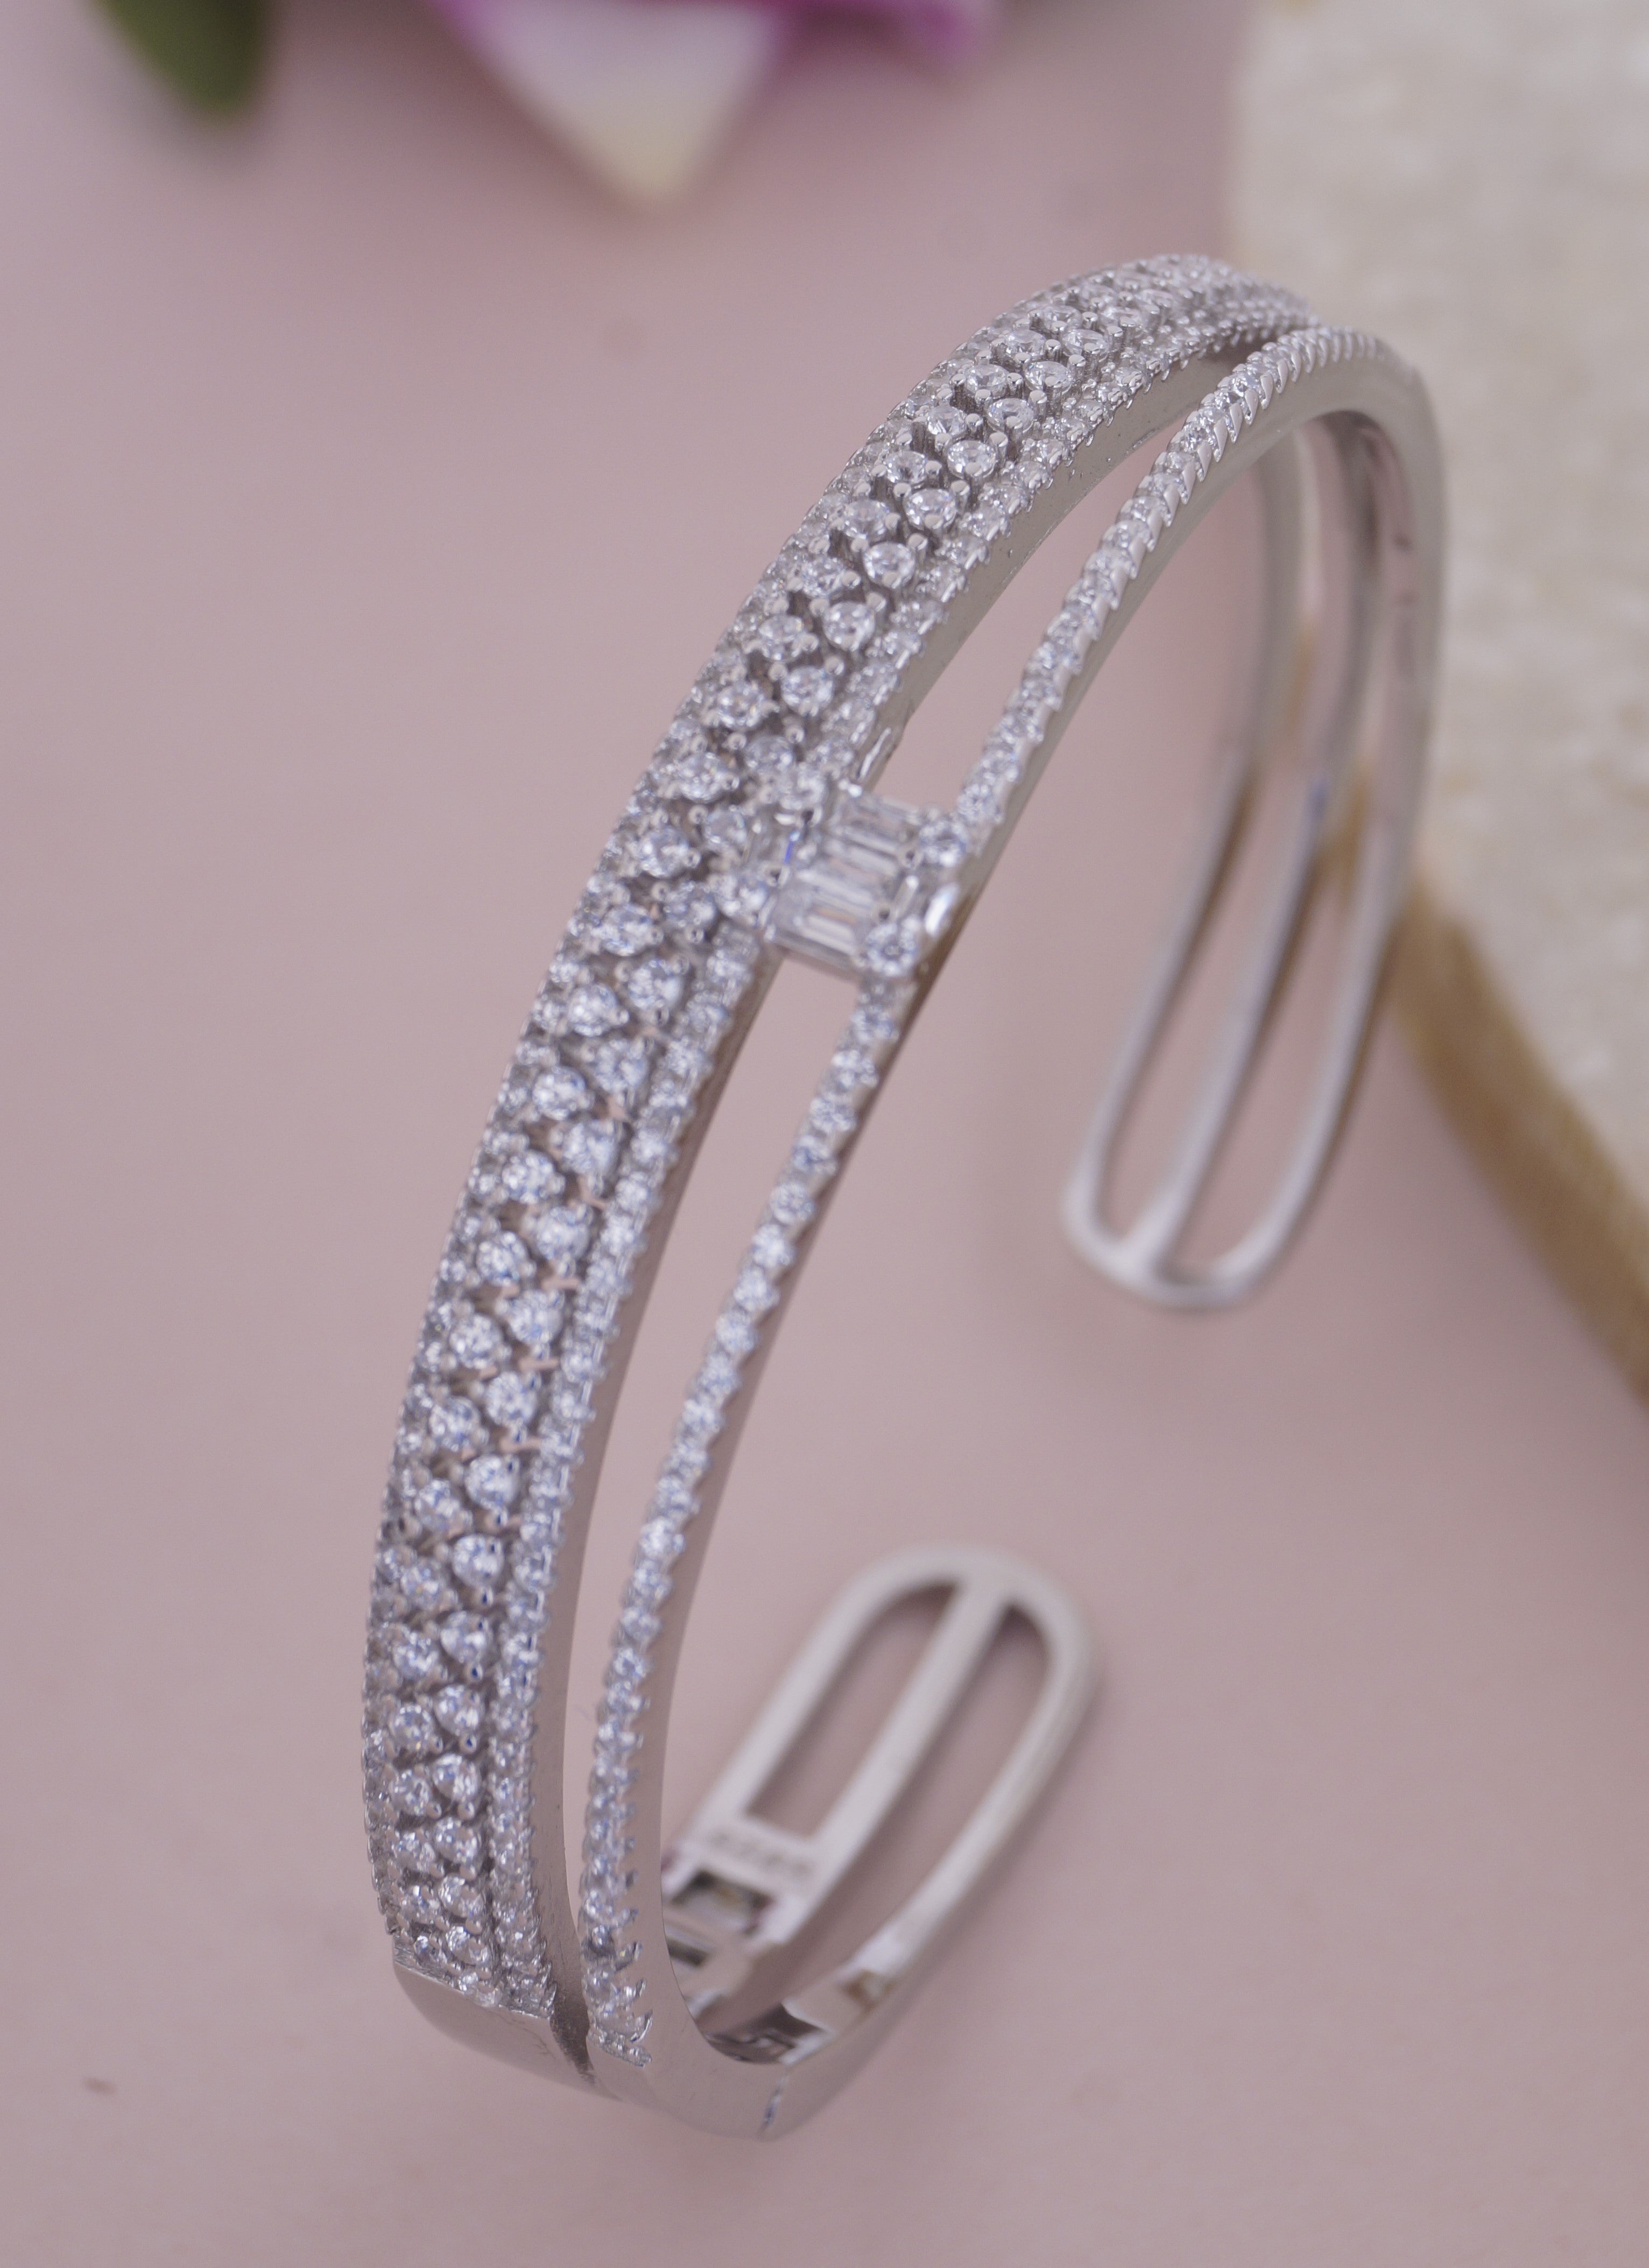 Buy quality 925 sterling silver cZ diamond bracelet for ladies in Ahmedabad